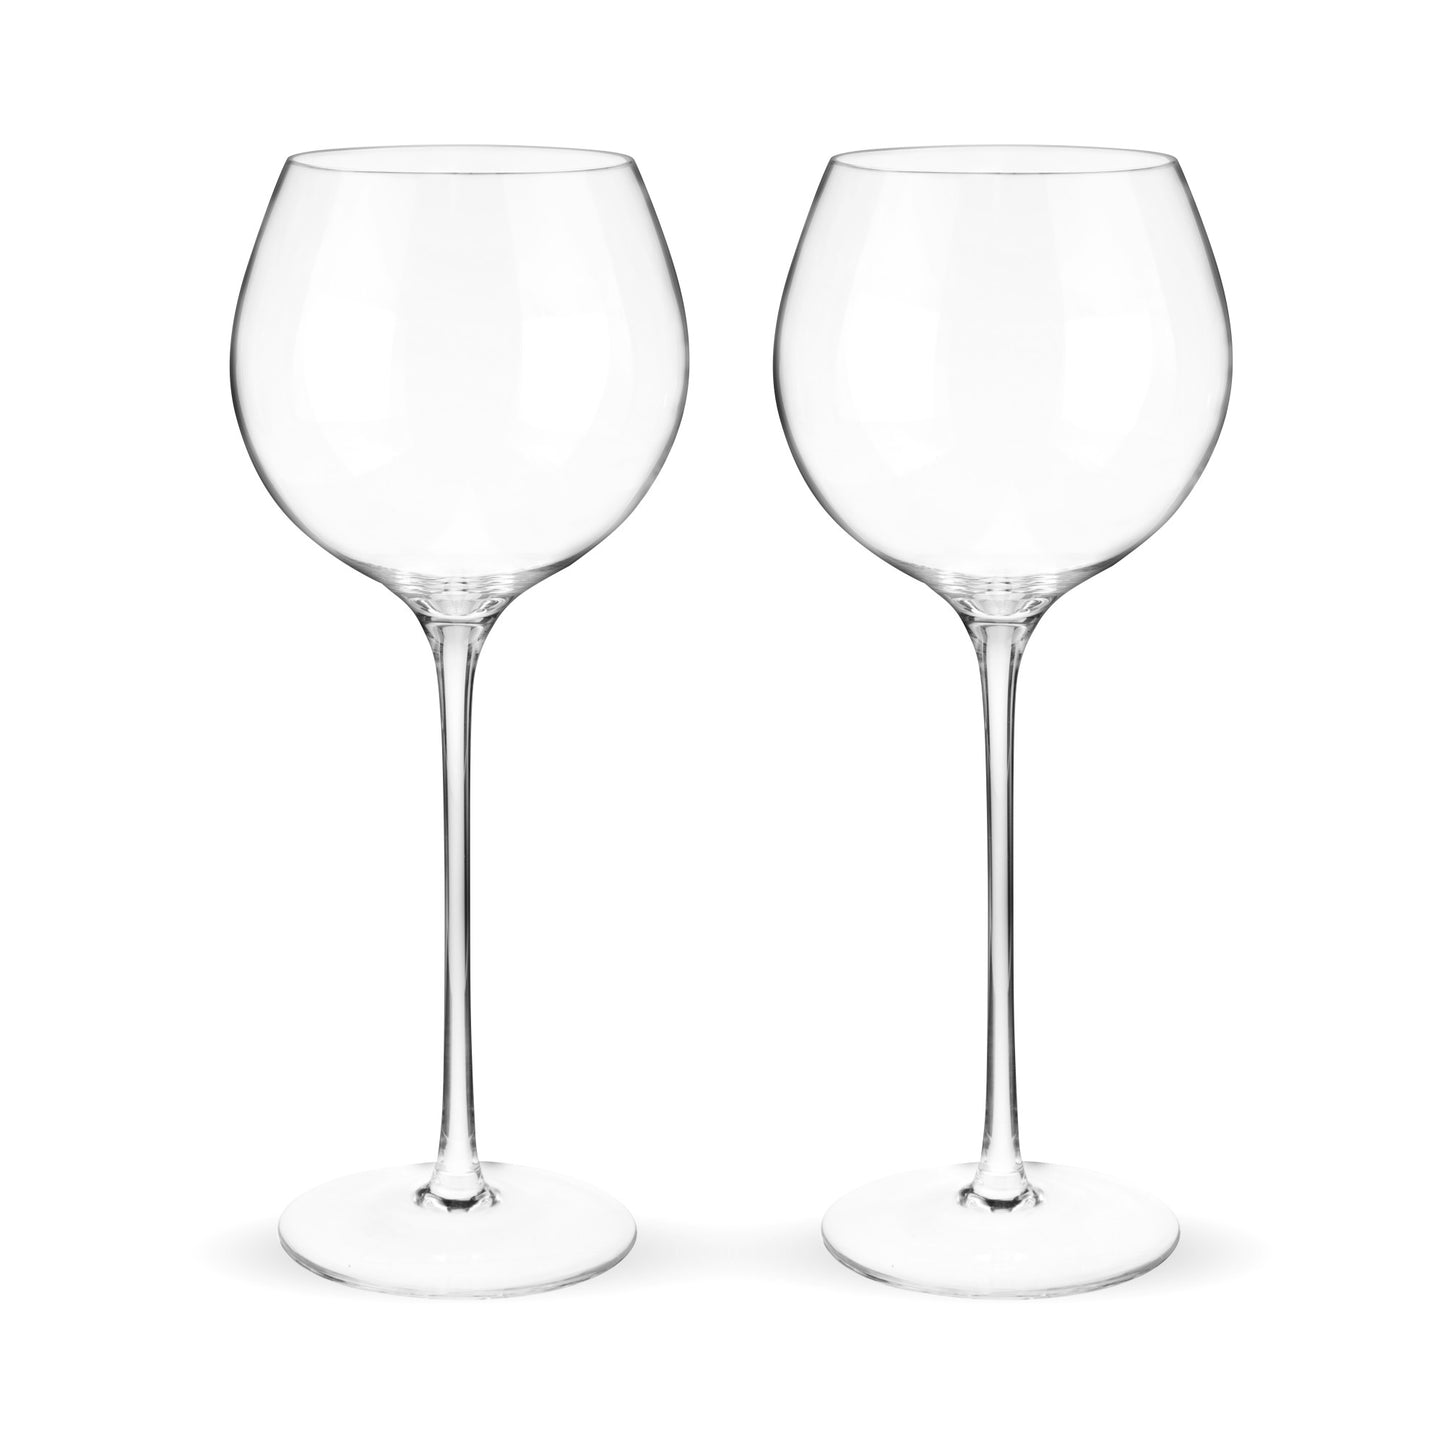 Twine Linger Crystal White Wine Glass, Set of 2 - lily & onyx